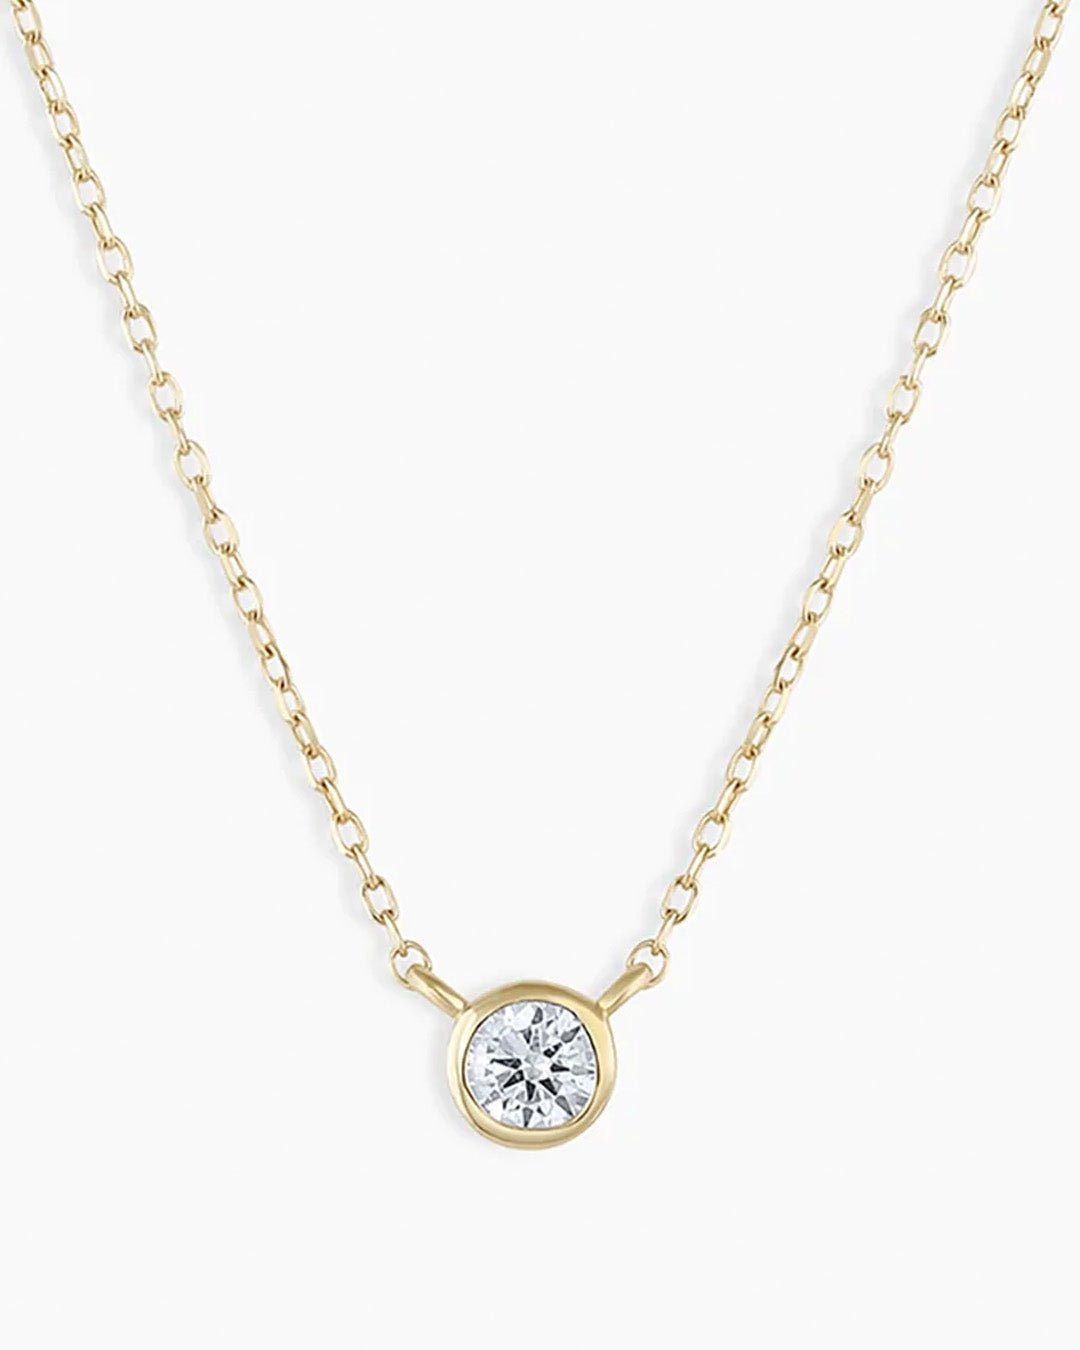 Mejuri 14K Yellow Gold Chain Necklaces: Chain Extender 14K Yellow Gold